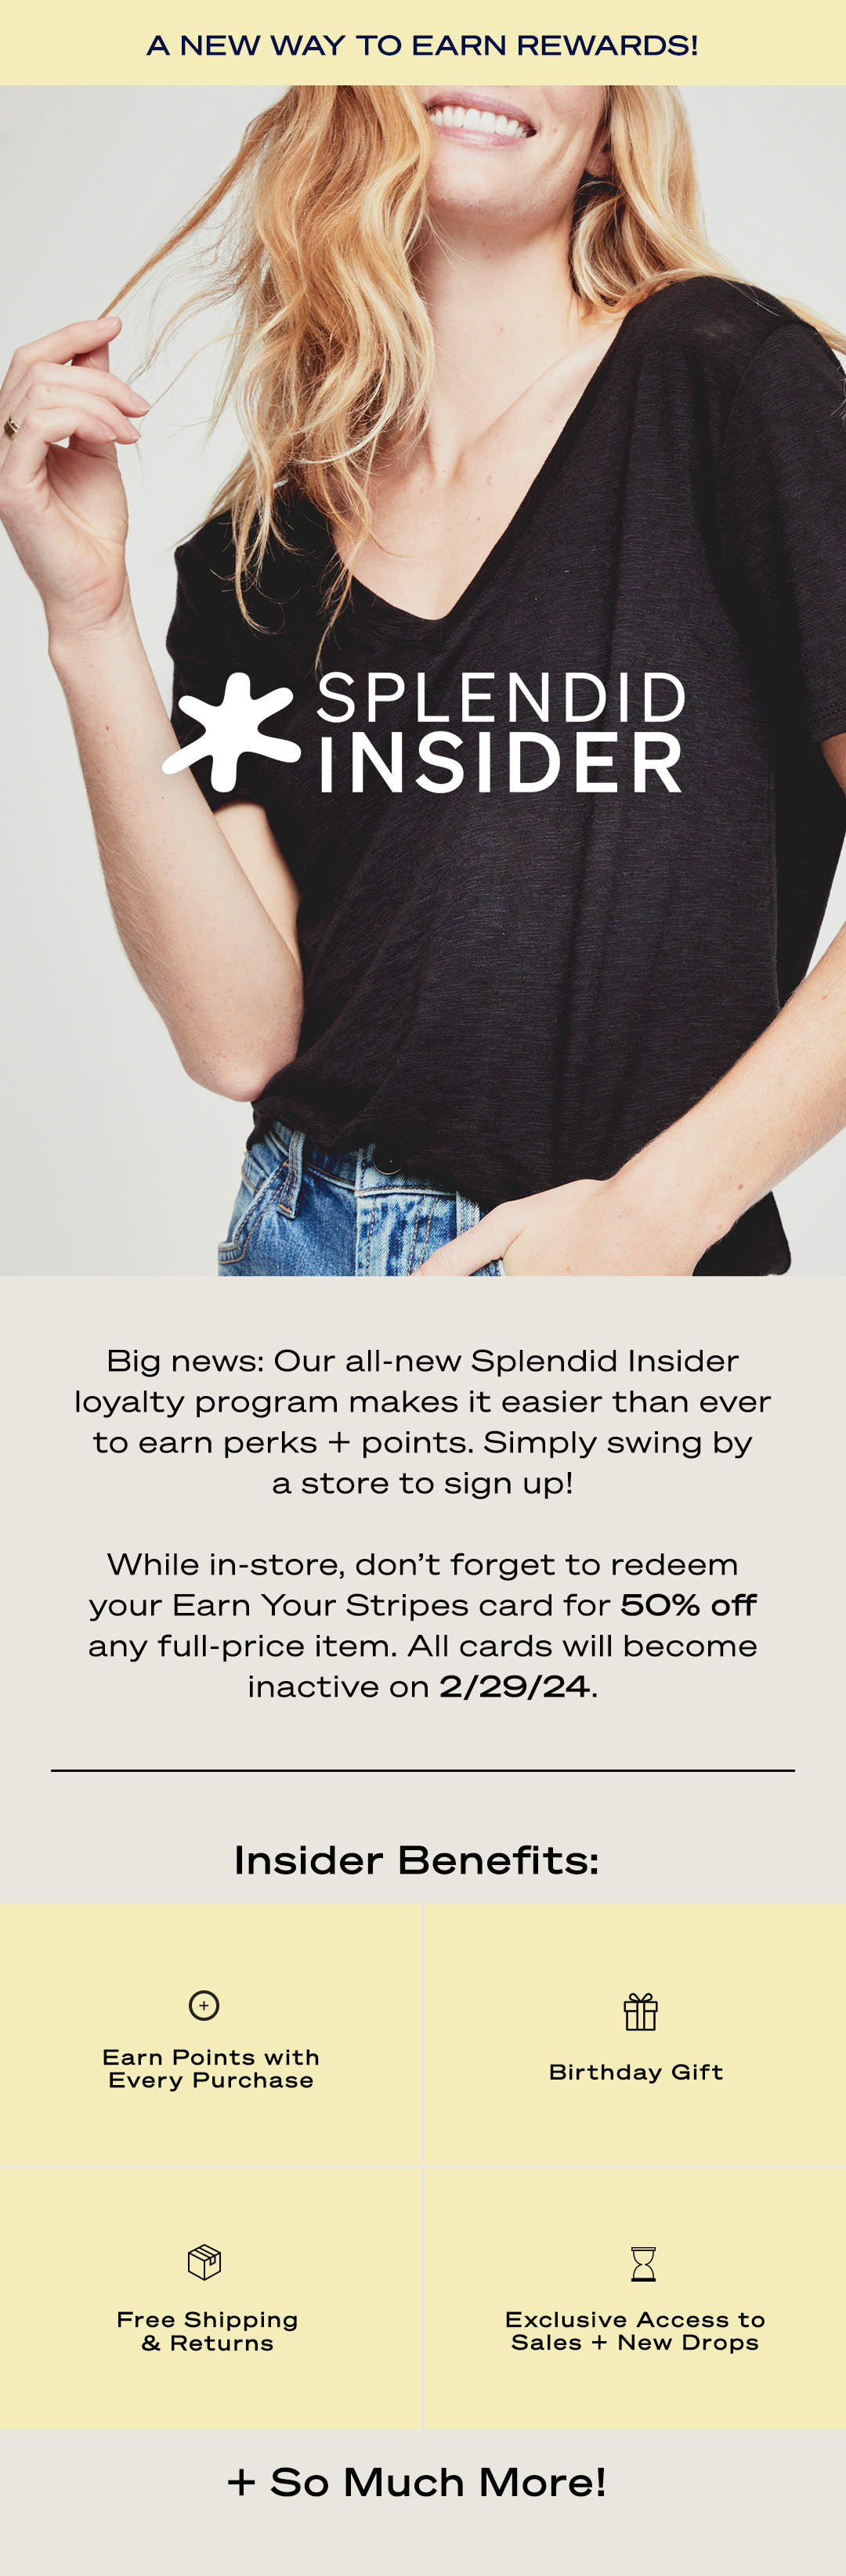 Blond woman wearing a black t-shirt and jeans promoting the new Splendid Insider Loyalty Program